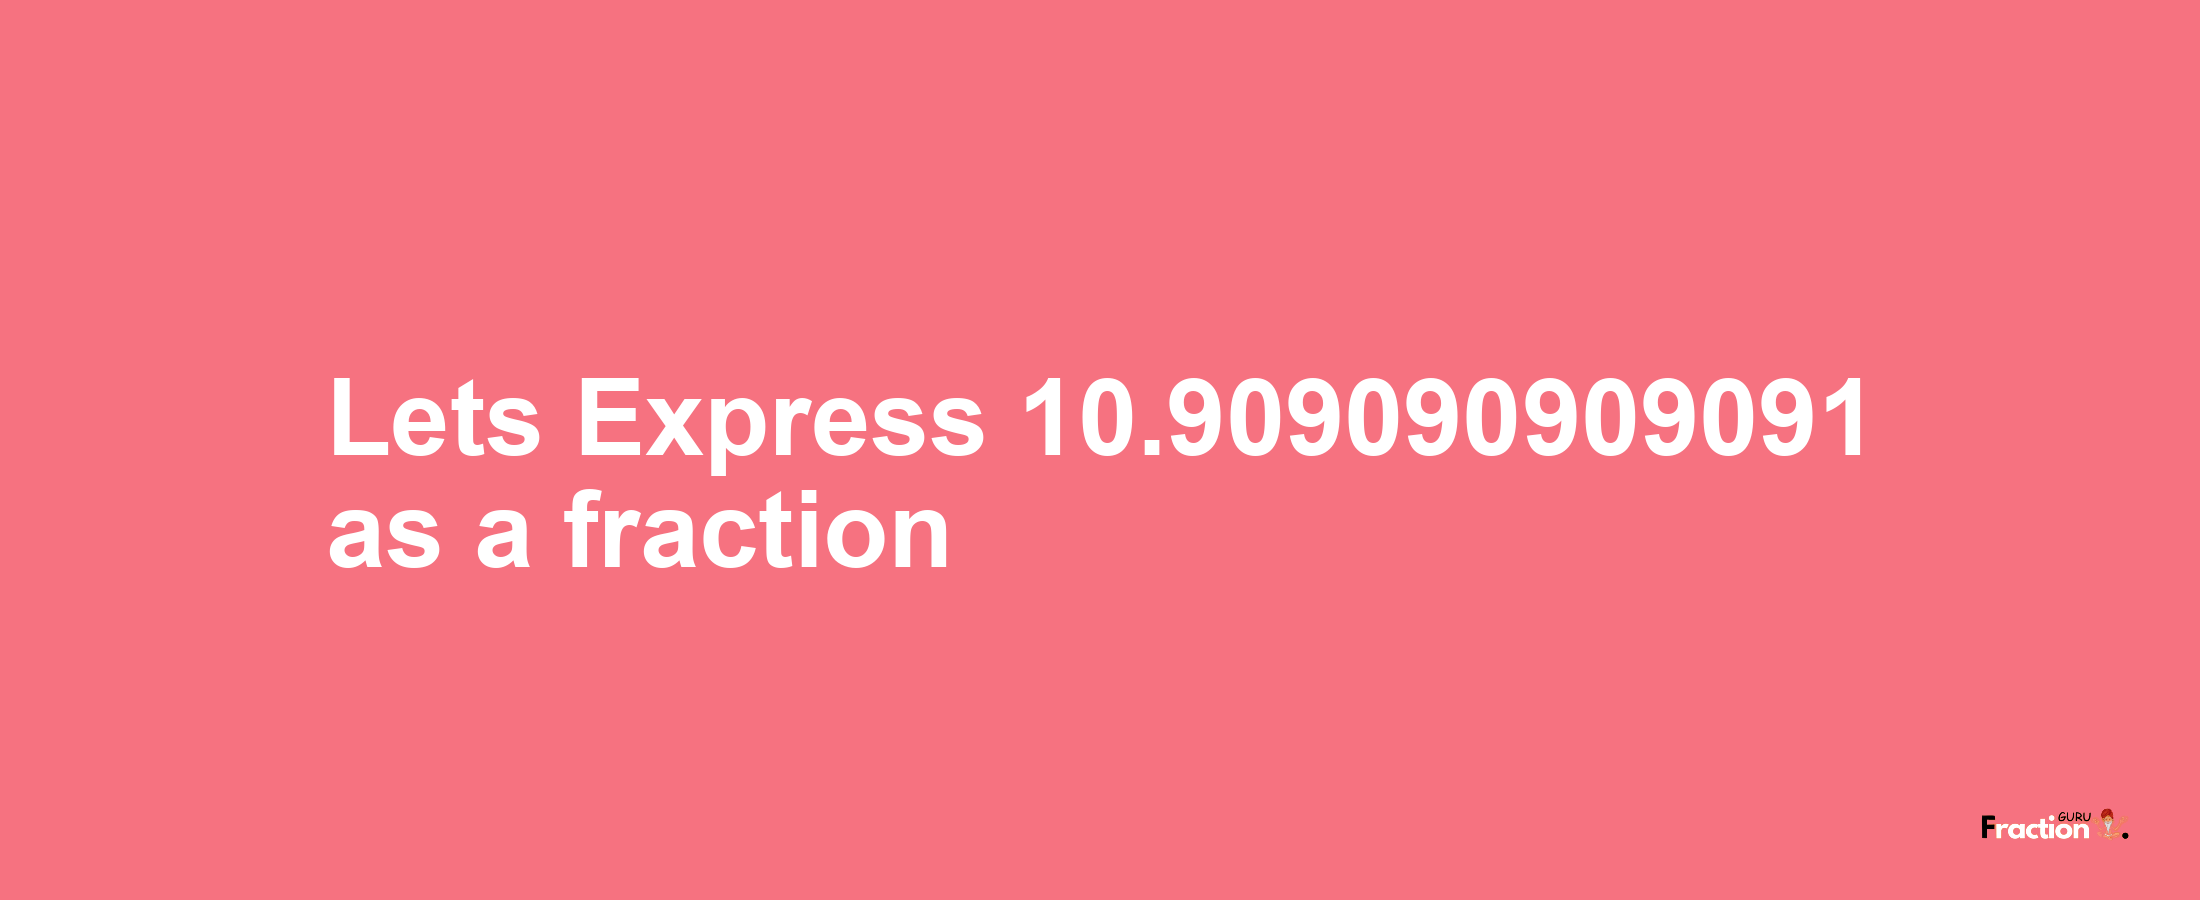 Lets Express 10.909090909091 as afraction